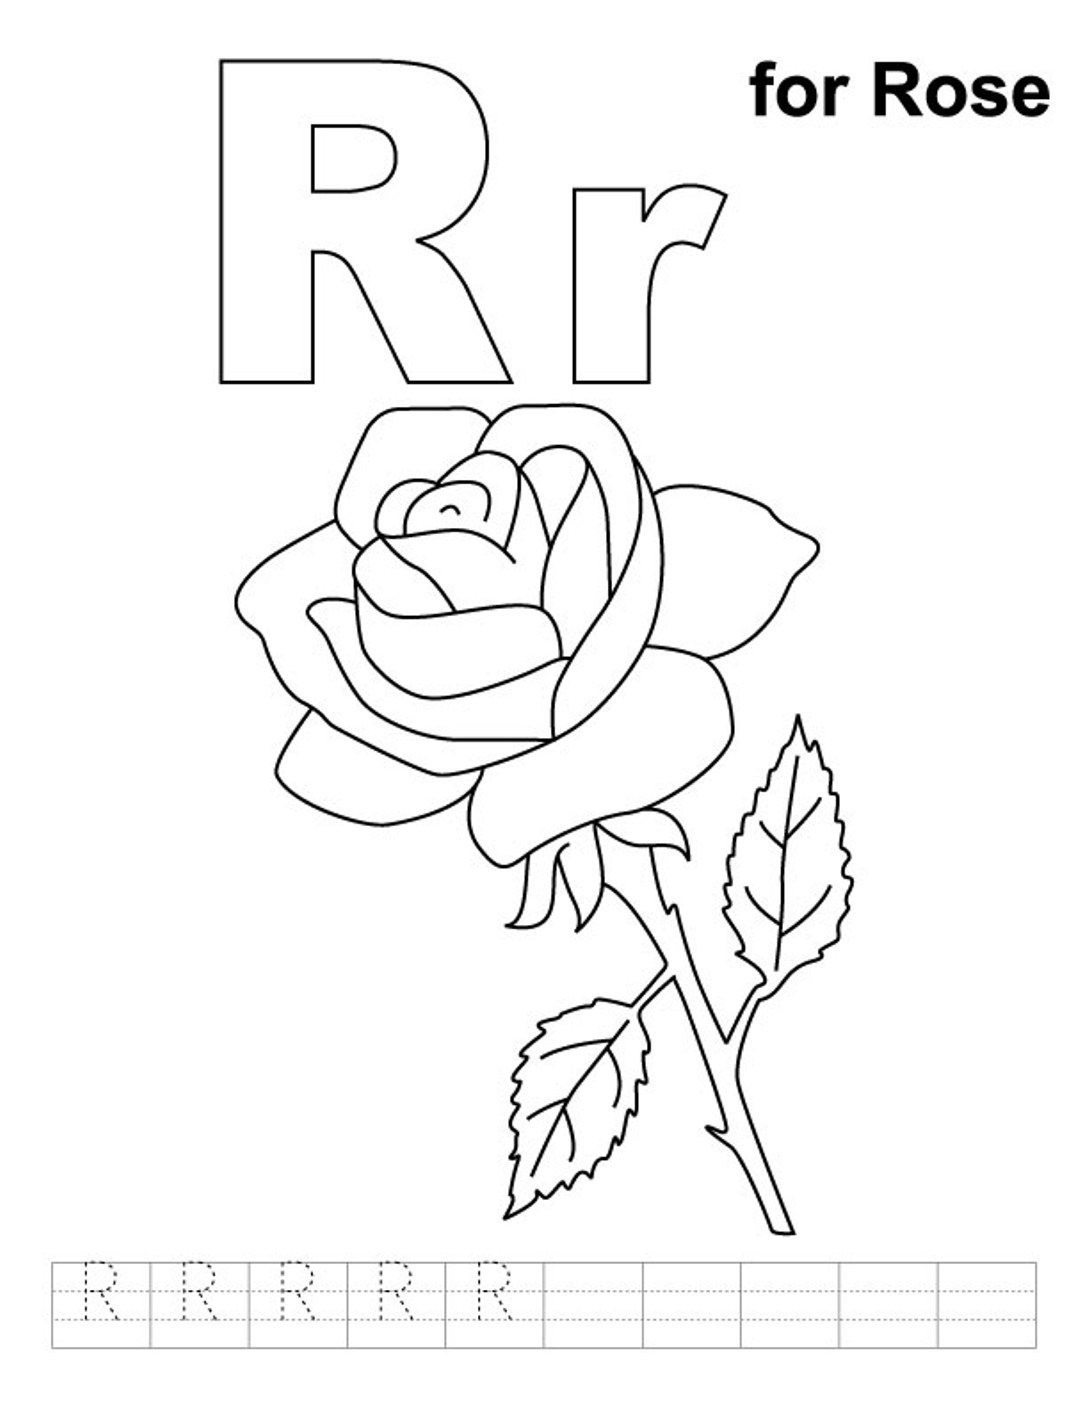 Preschool Coloring Sheets Roses
 Hearts And Roses Coloring Pages Good Drawing With grig3